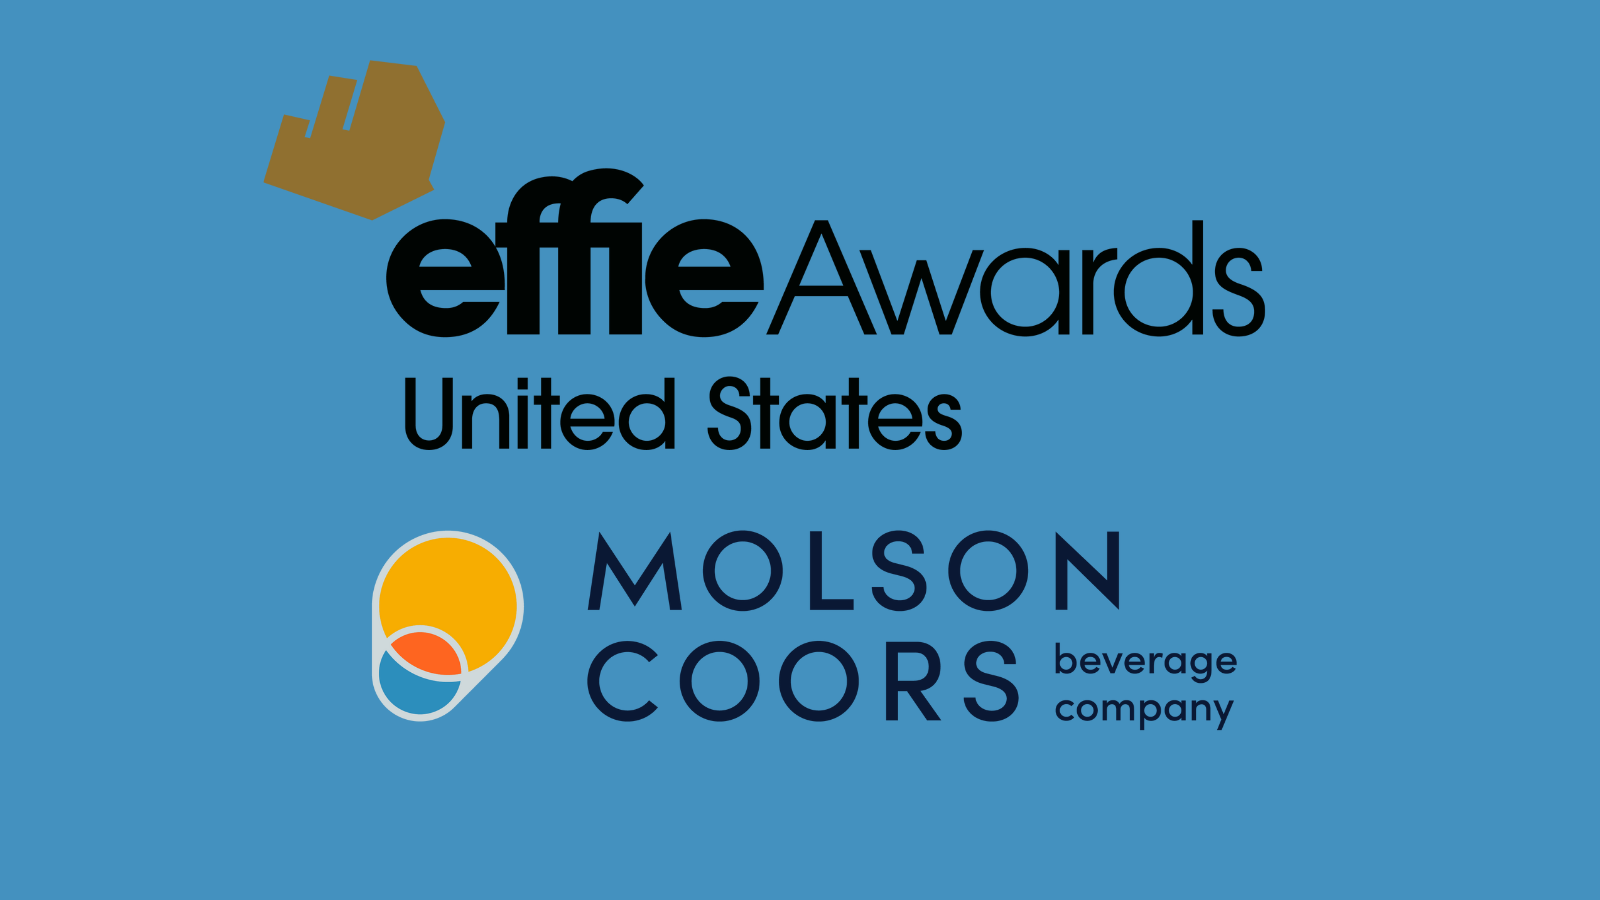 Molson Coors named Top US Marketer in Effie Awards